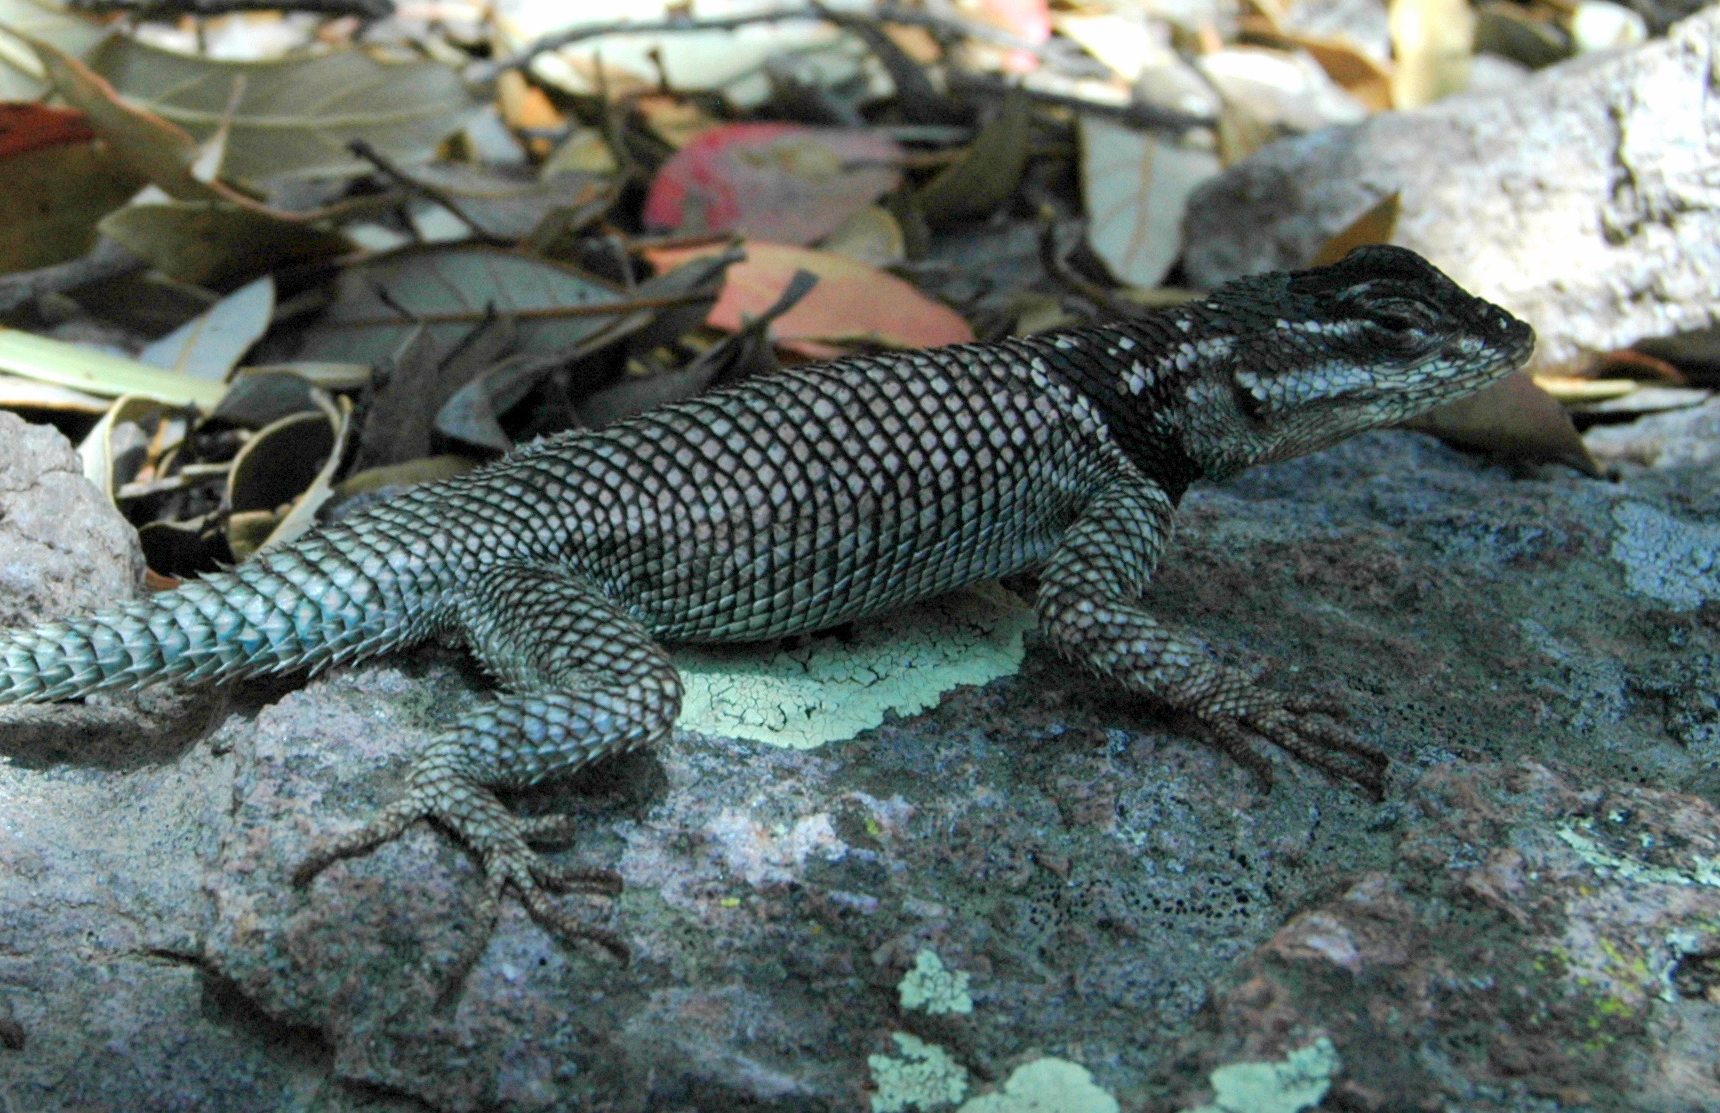 For lizards, climate change is a deadly — and complex — threat